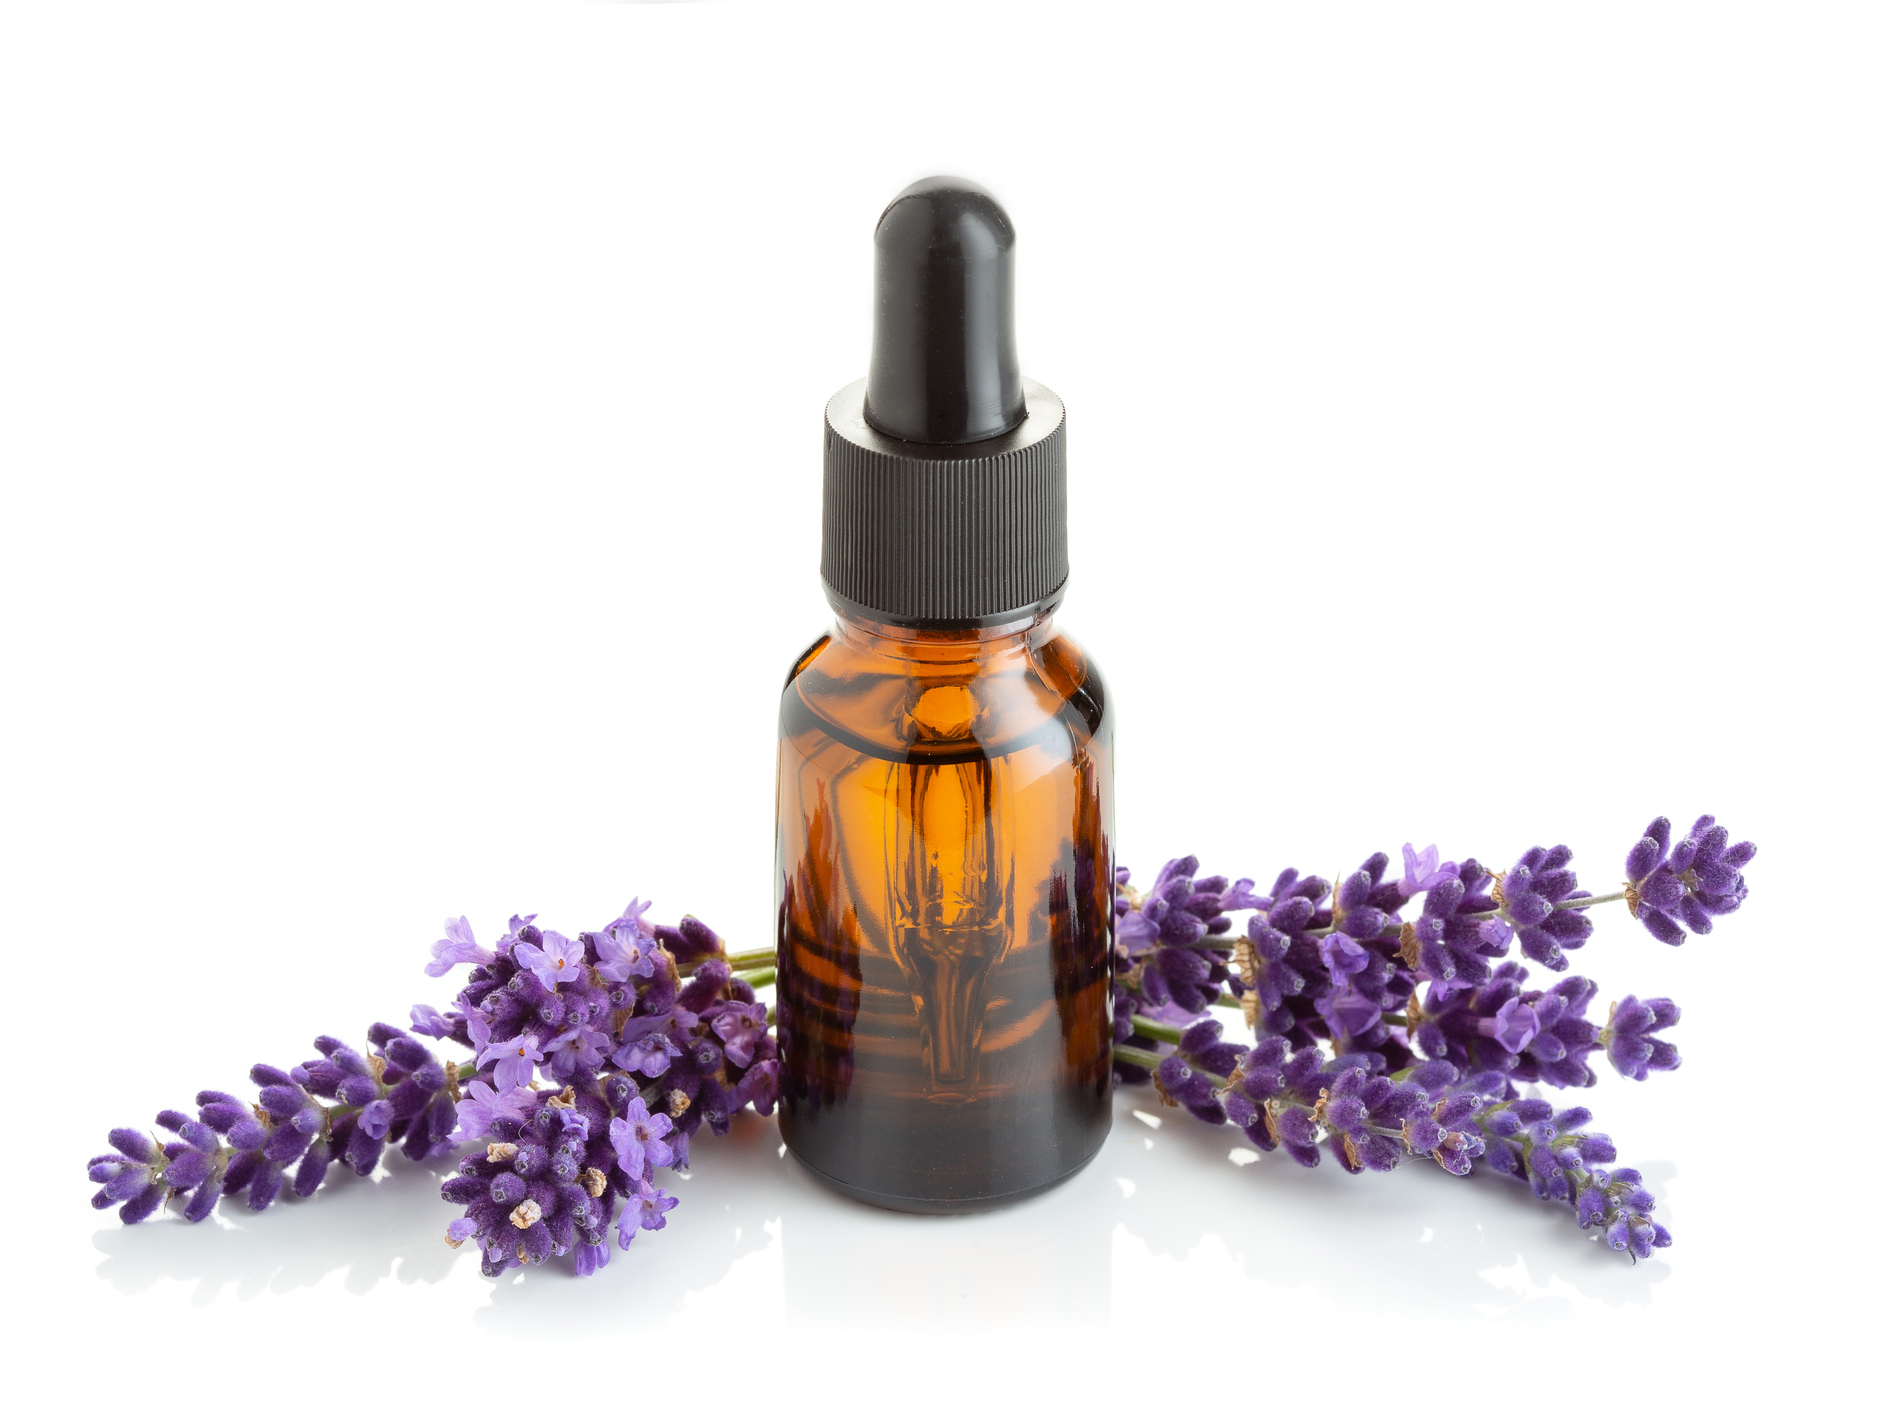 Essential oils for cuts, scrapes and wounds